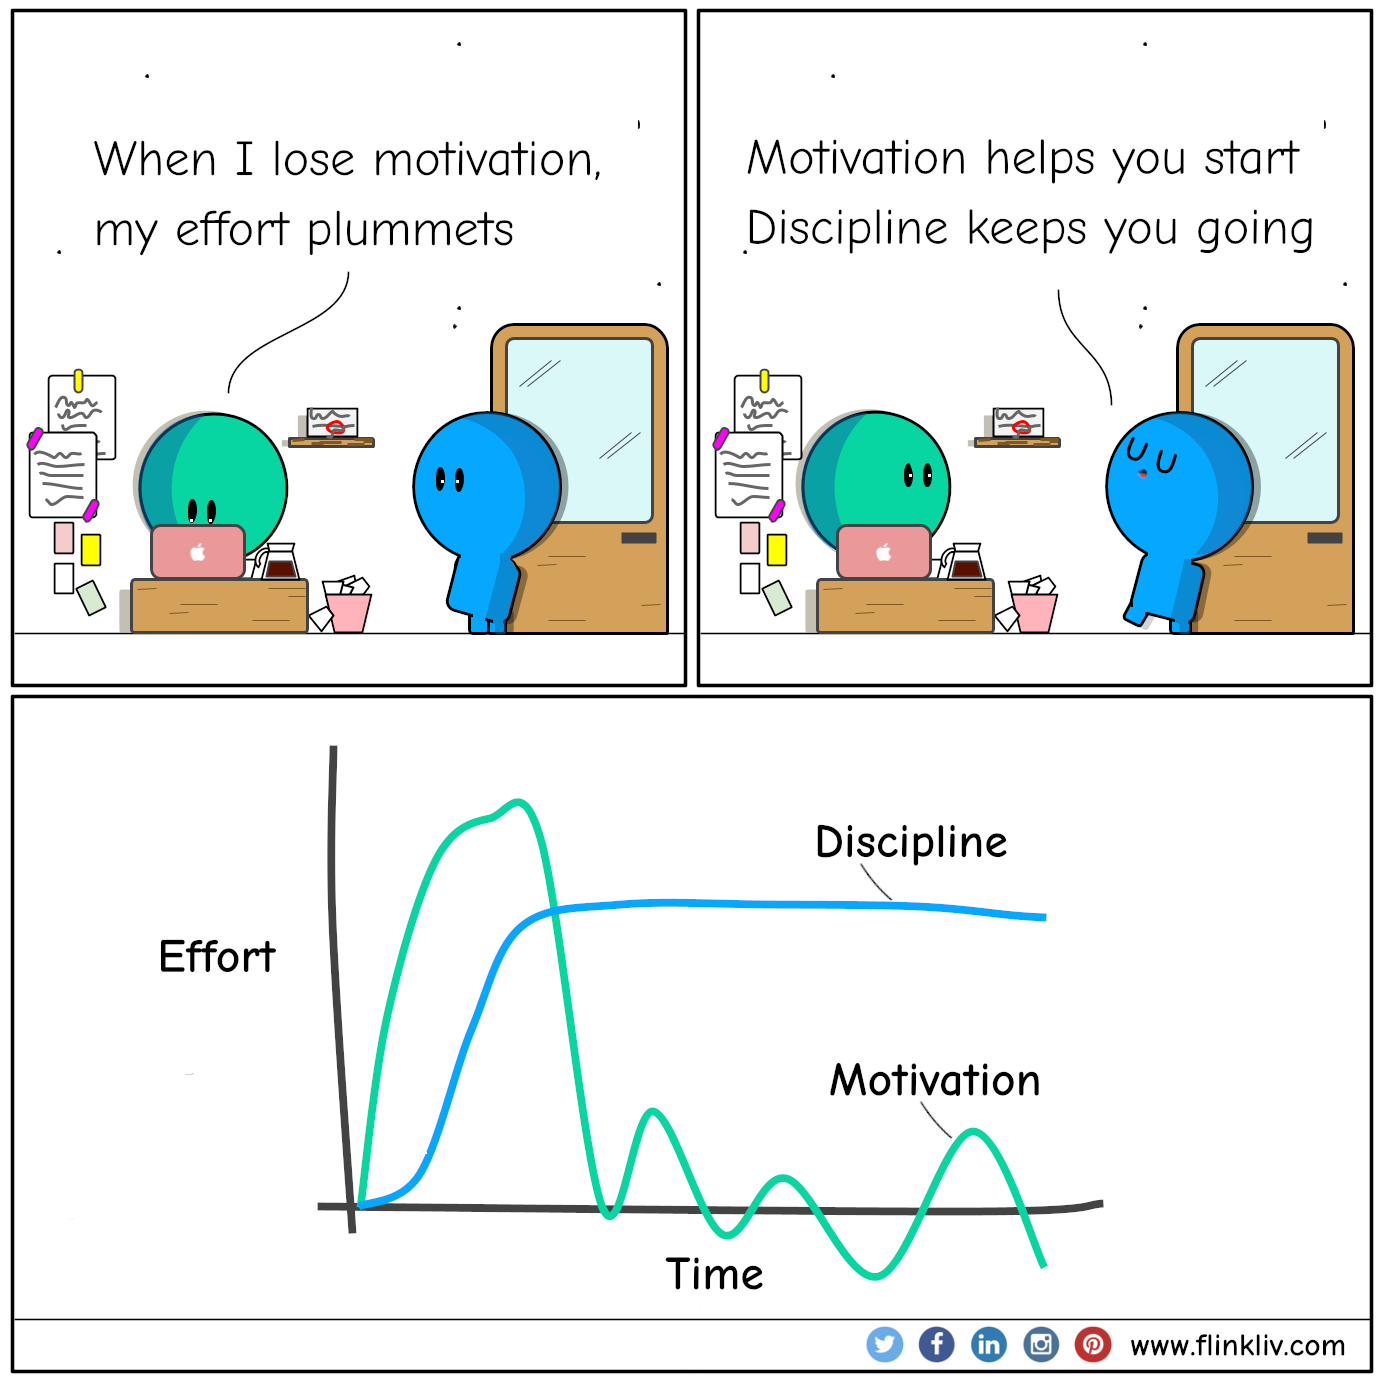 Conversation between A and B about motivation vs discipline.
				A: I was motivated, but not now
				B: you need discipline
				B: Motivation helps you start, and discipline keeps you going.
				